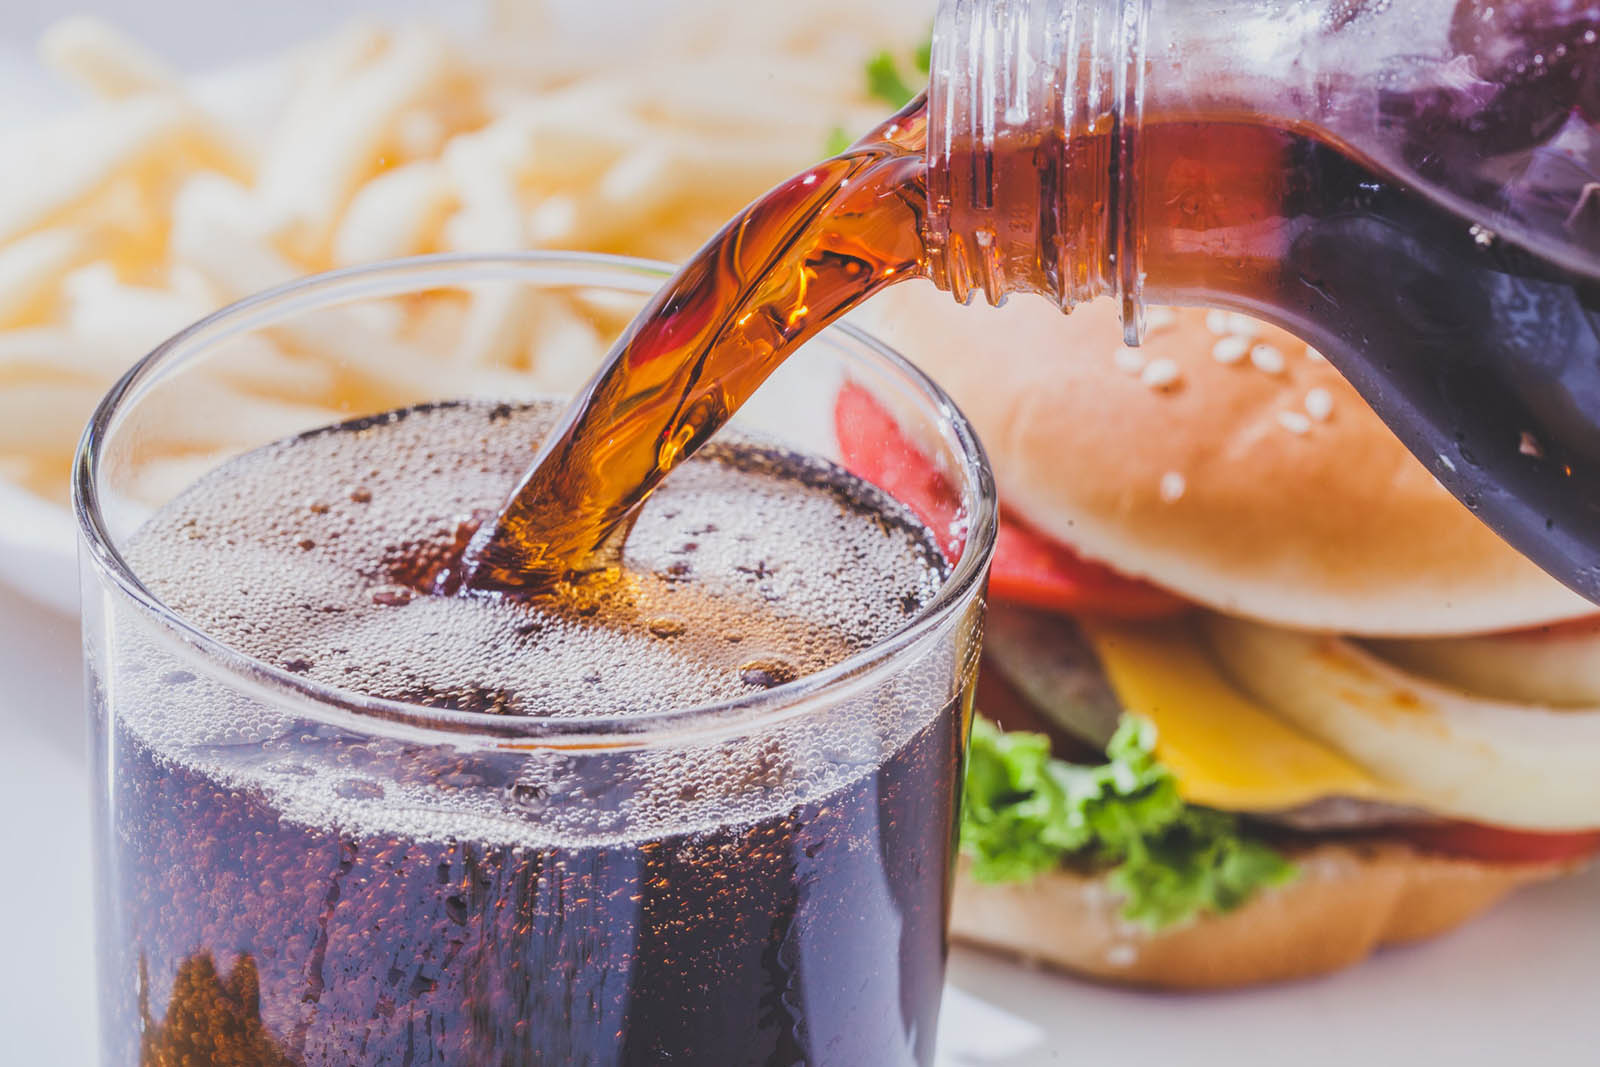 🍔 Plan a Dinner Party With Only Fast Food and We’ll Reveal Your Exact Age Soda Coca Cola Soft Drink Burger Fast Food